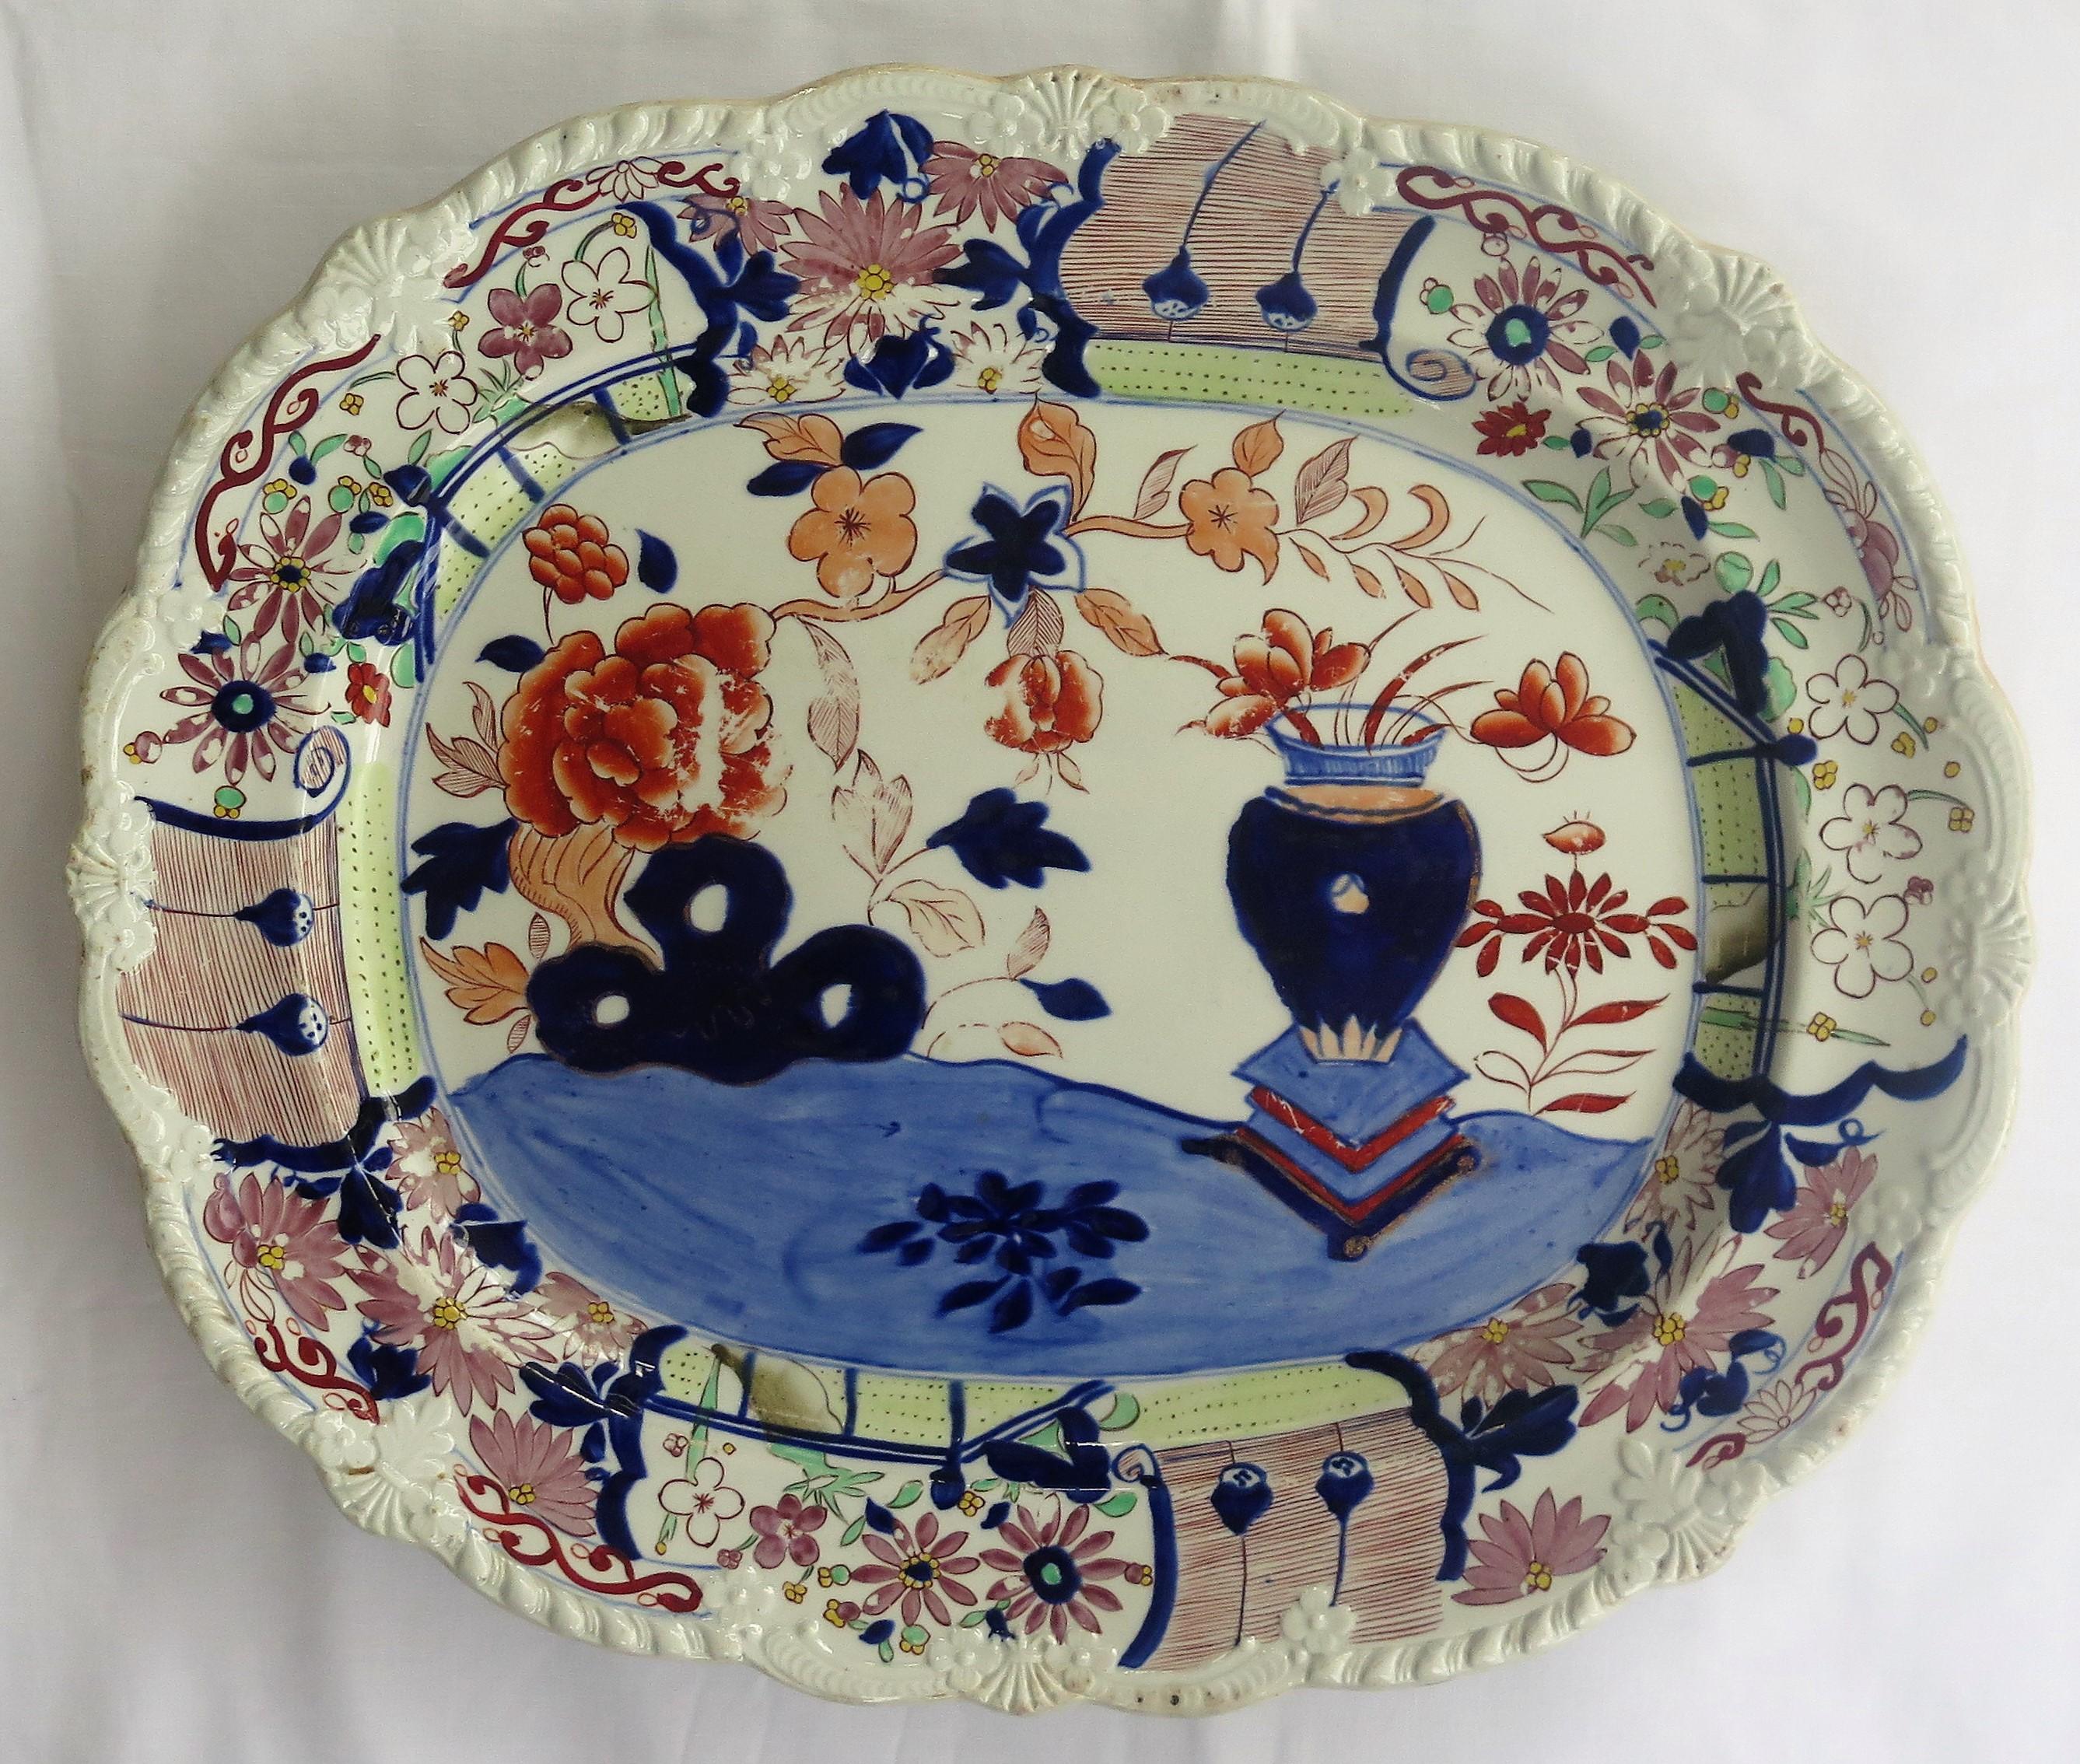 This a large, early 19th century platter of about 18 inch width made by Mason's Ironstone in the Vase and Rock hand-painted pattern, circa 1815. 

A very decorative and distinctive piece.

Very early 19th century Mason's Ironstone platters are rare